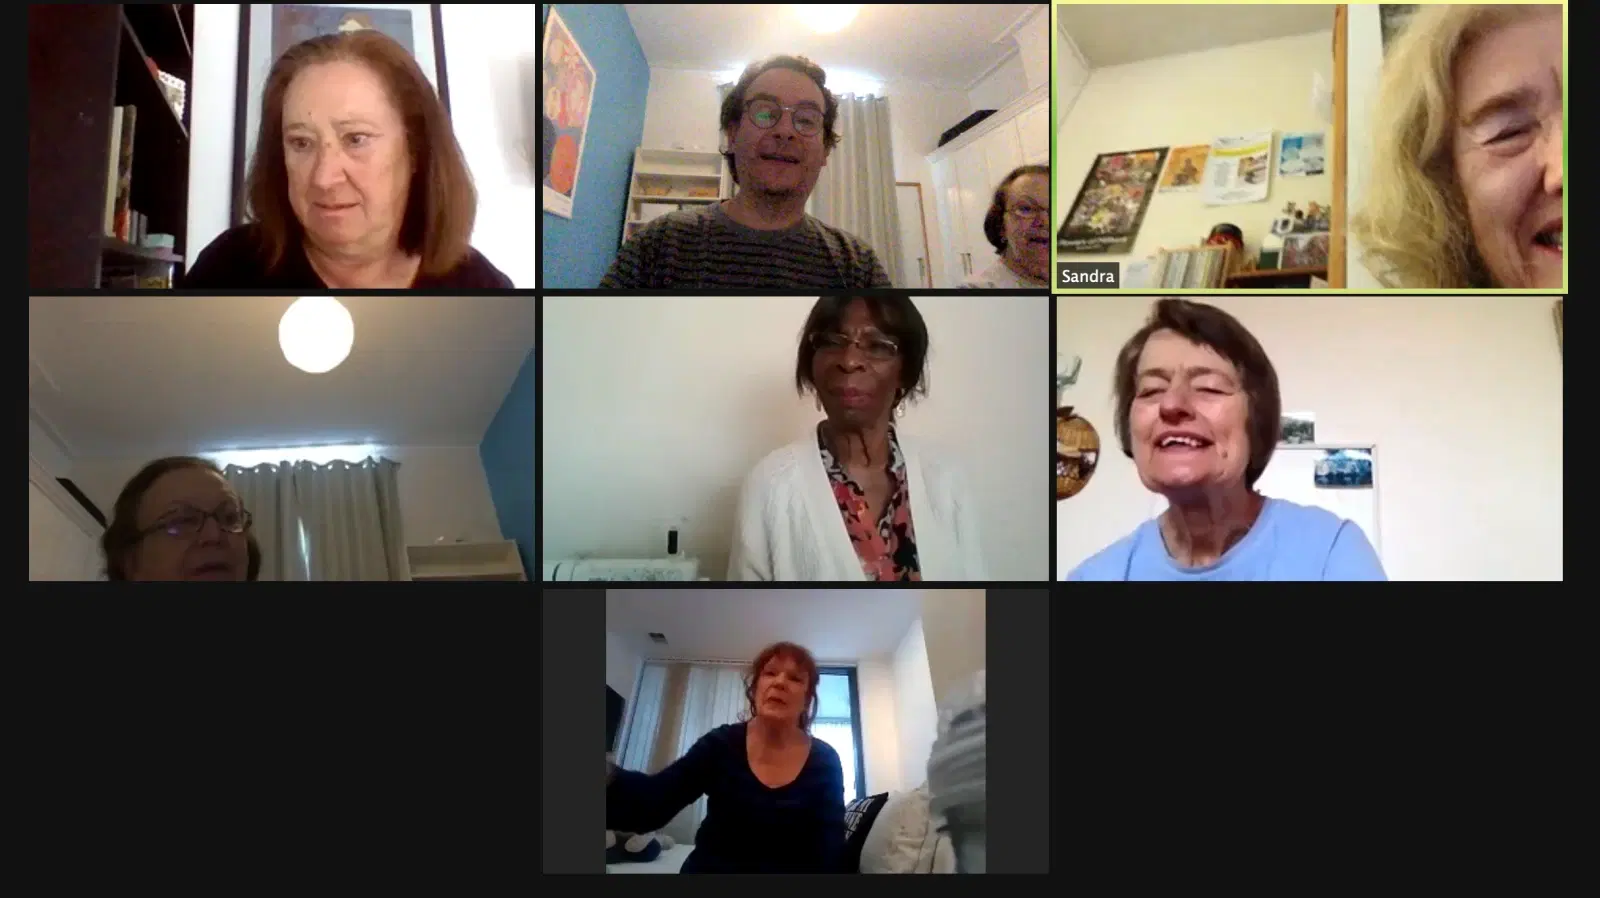 A group of individuals engaging in a virtual video call, showcasing a range of expressions and environments, possibly indicating a casual and social online gathering.